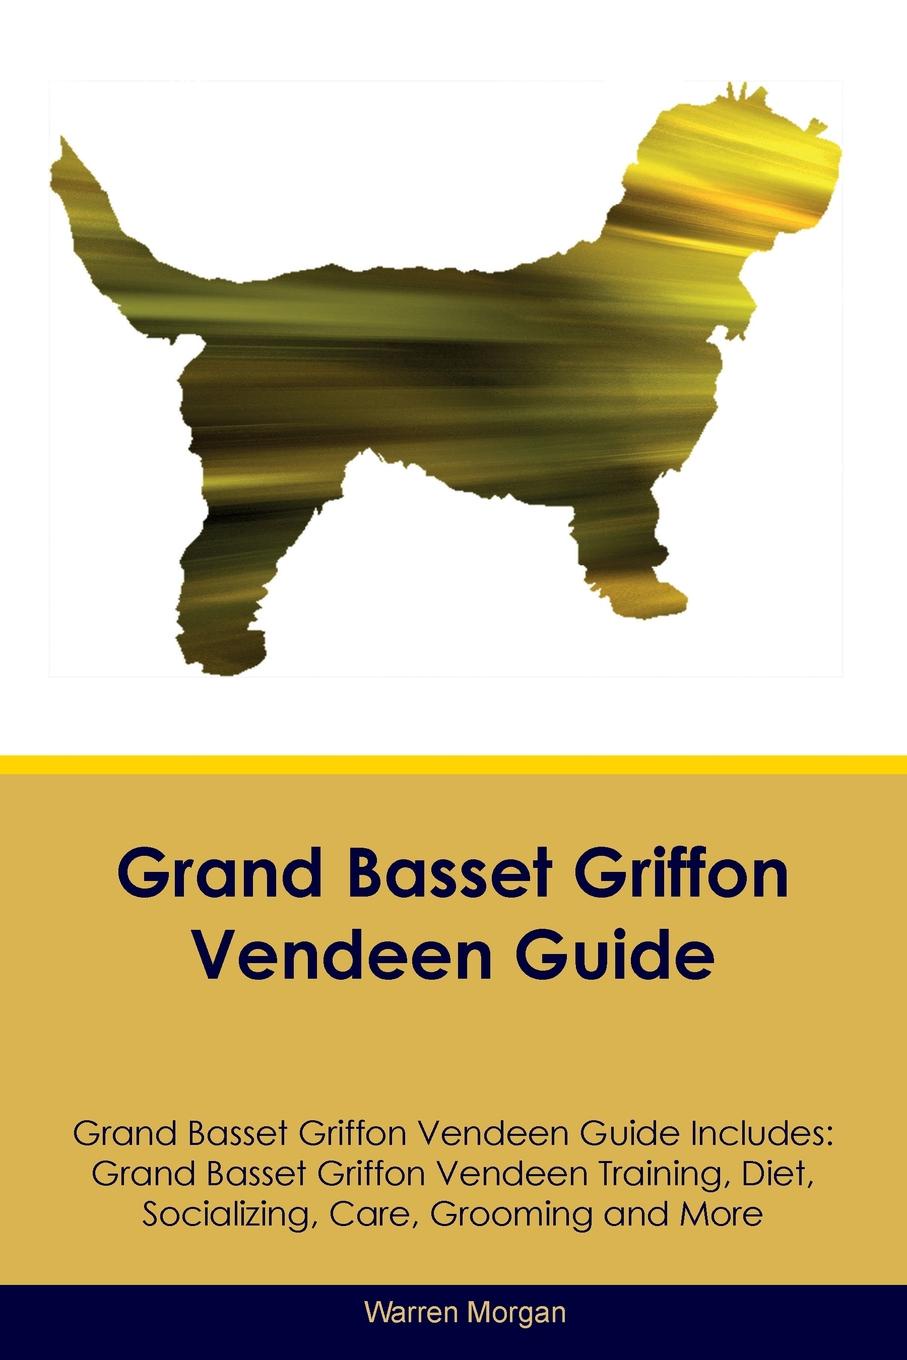 Grand Basset Griffon Vendeen Guide Grand Basset Griffon Vendeen Guide Includes. Grand Basset Griffon Vendeen Training, Diet, Socializing, Care, Grooming, Breeding and More